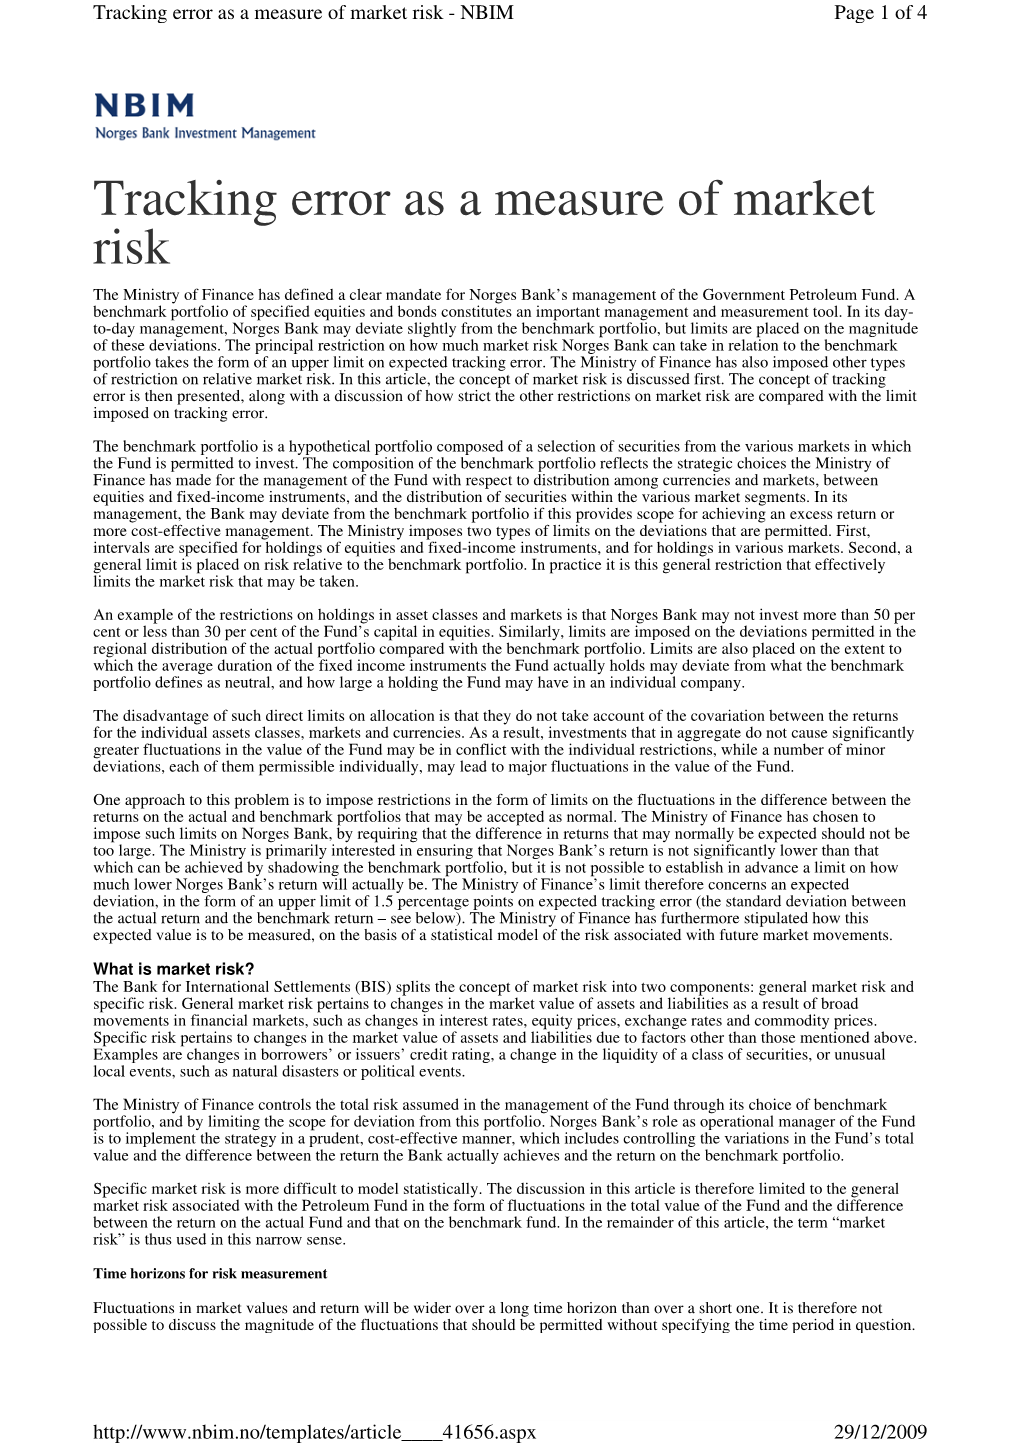 Tracking Error As a Measure of Market Risk - NBIM Page 1 of 4